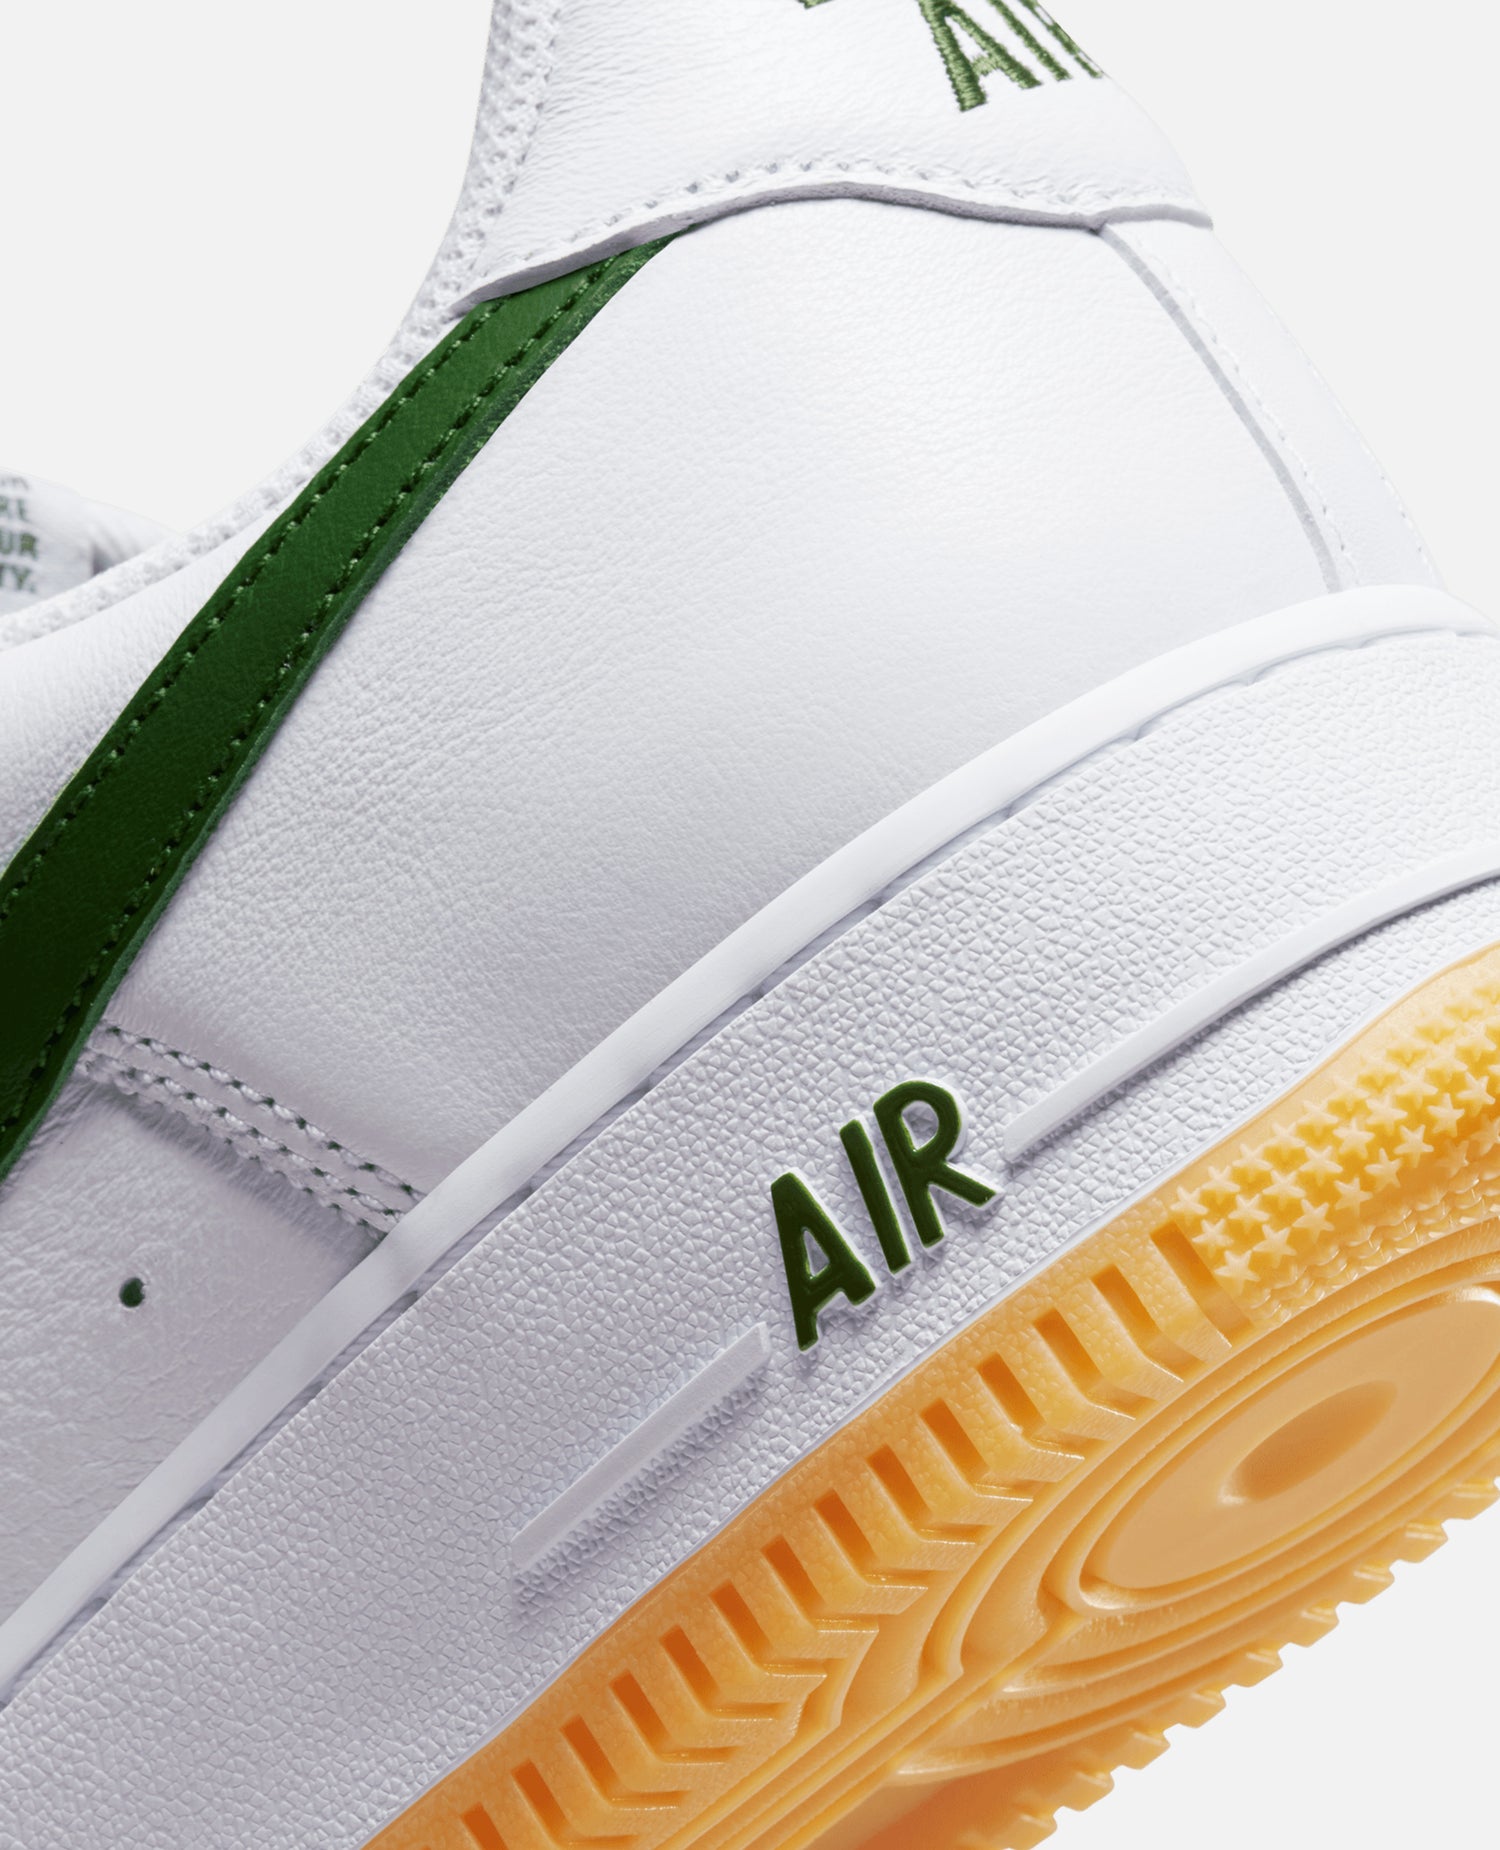 Nike Air Force 1 Low Retro (Bianco/Verde foresta-Giallo gomma)